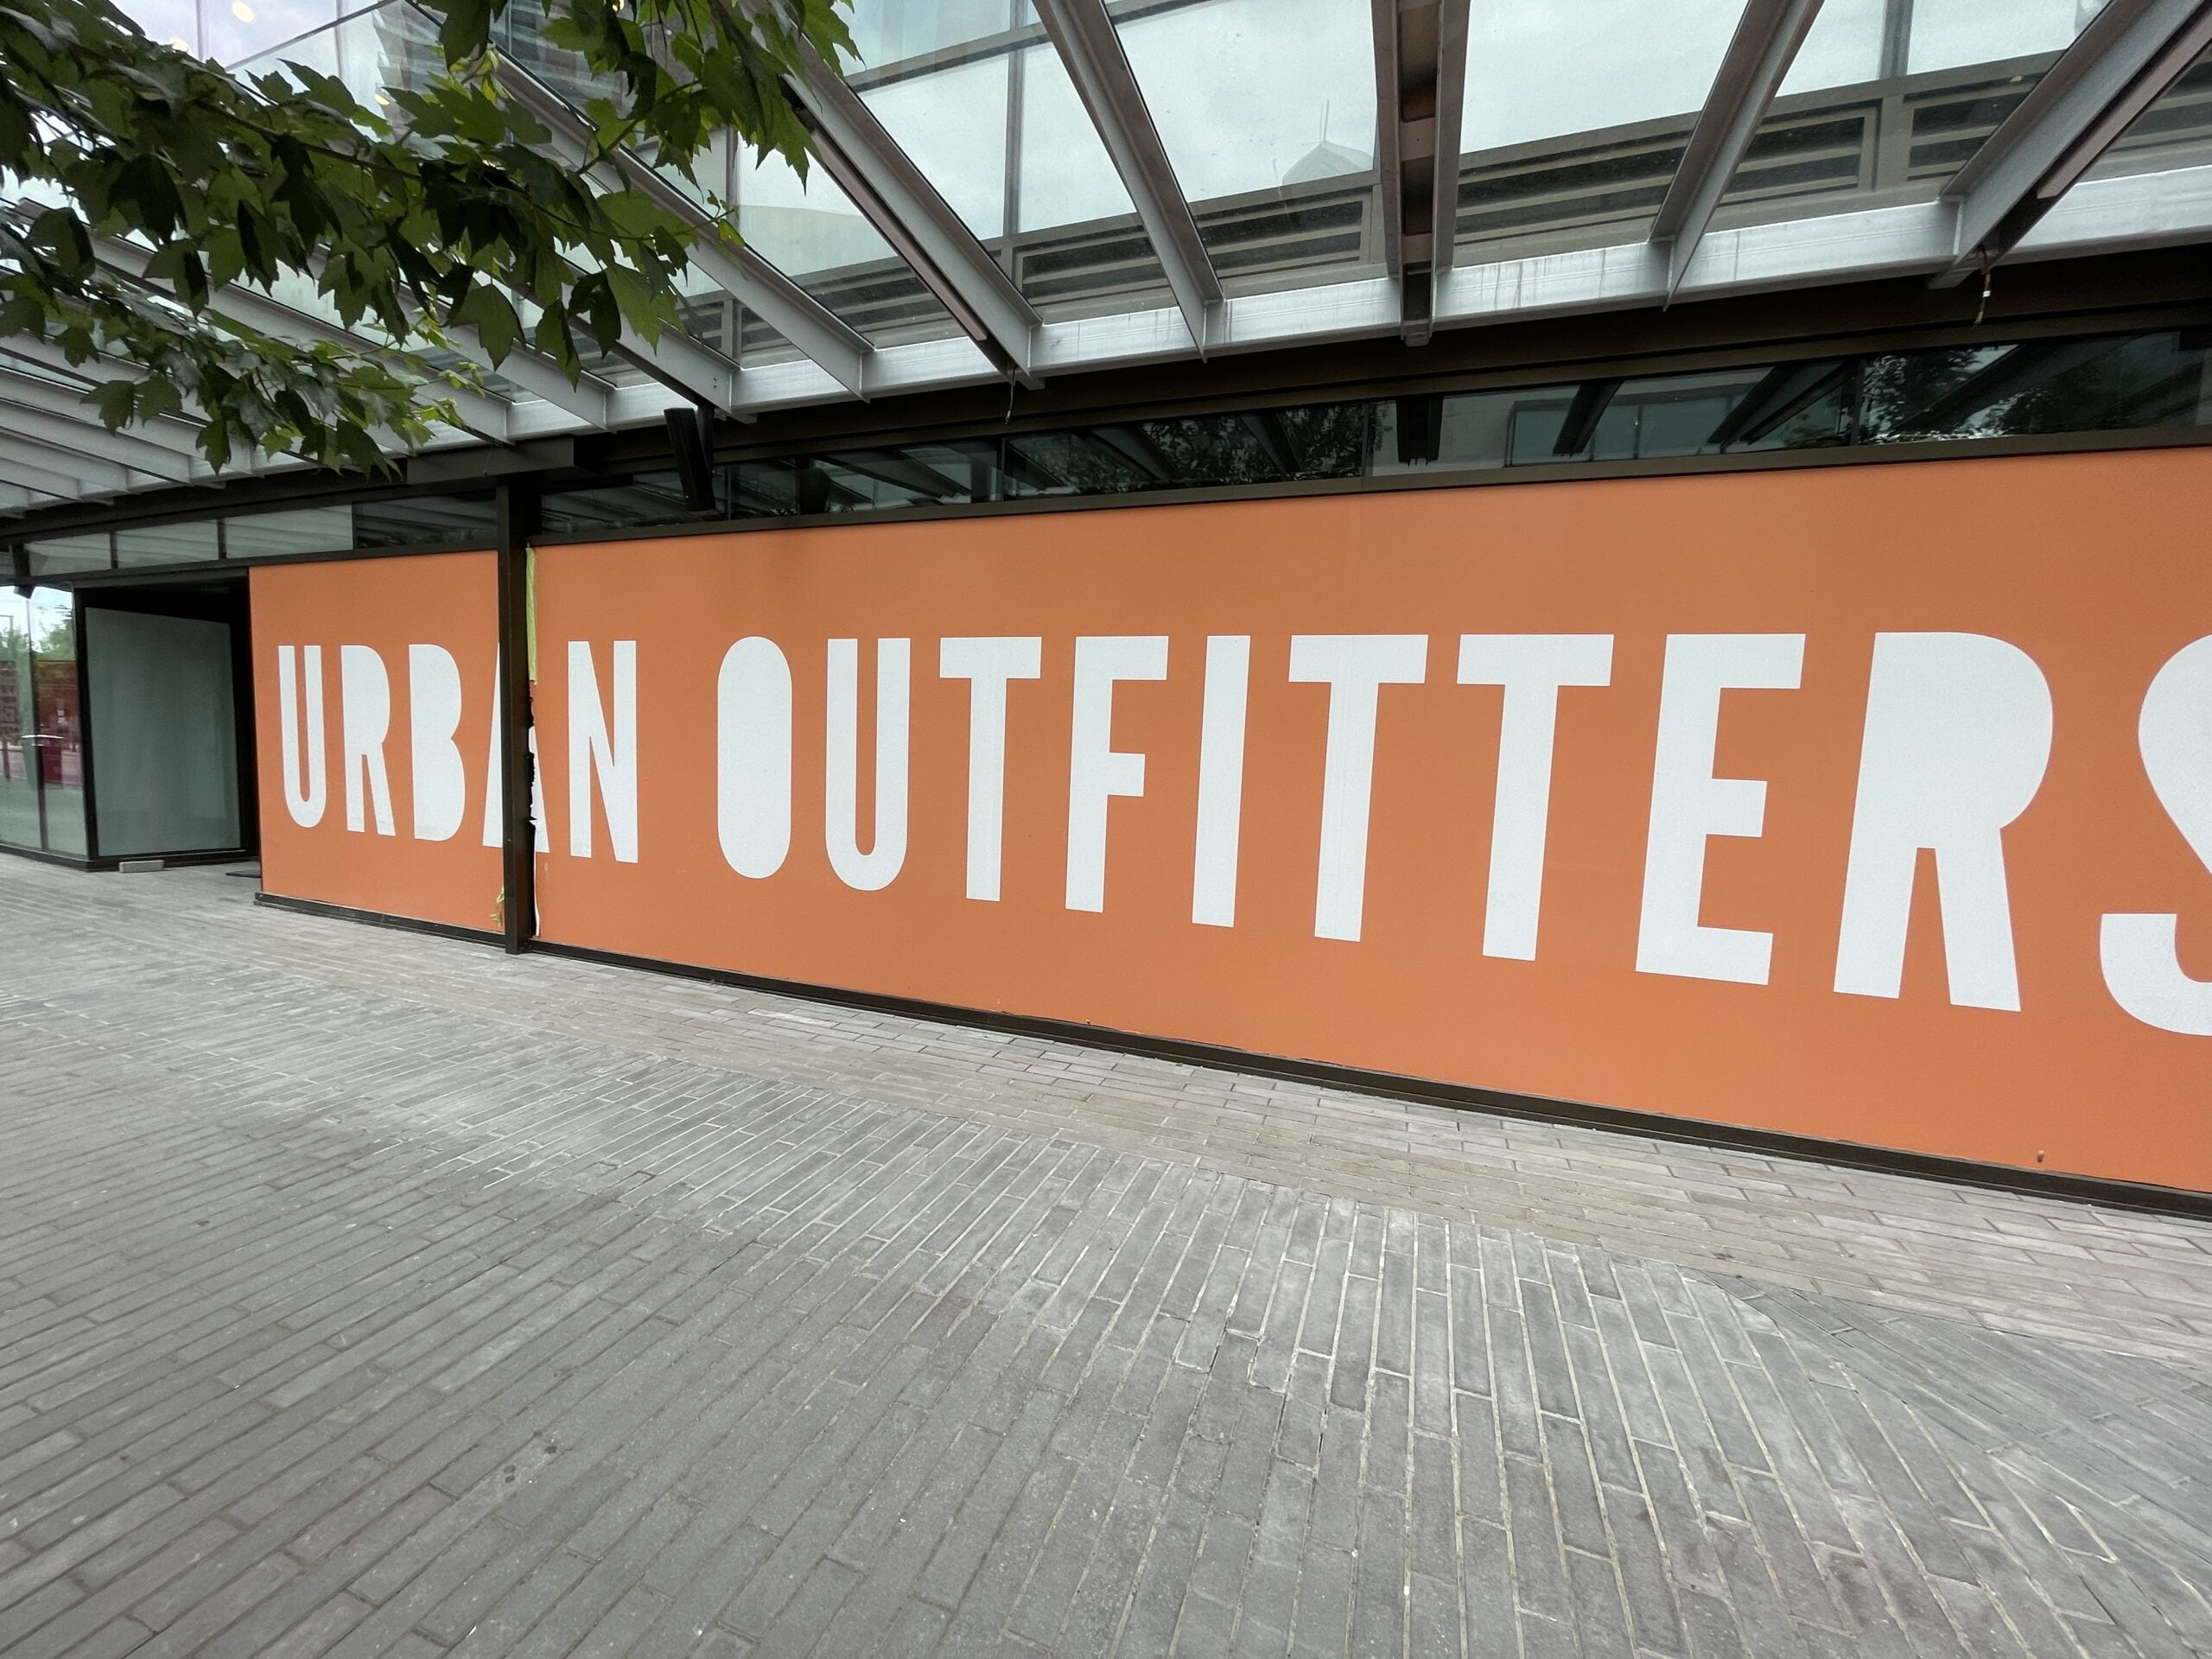 Upcoming Urban Outfitter at The Amazing Brentwood. Photo: Lee Rivett